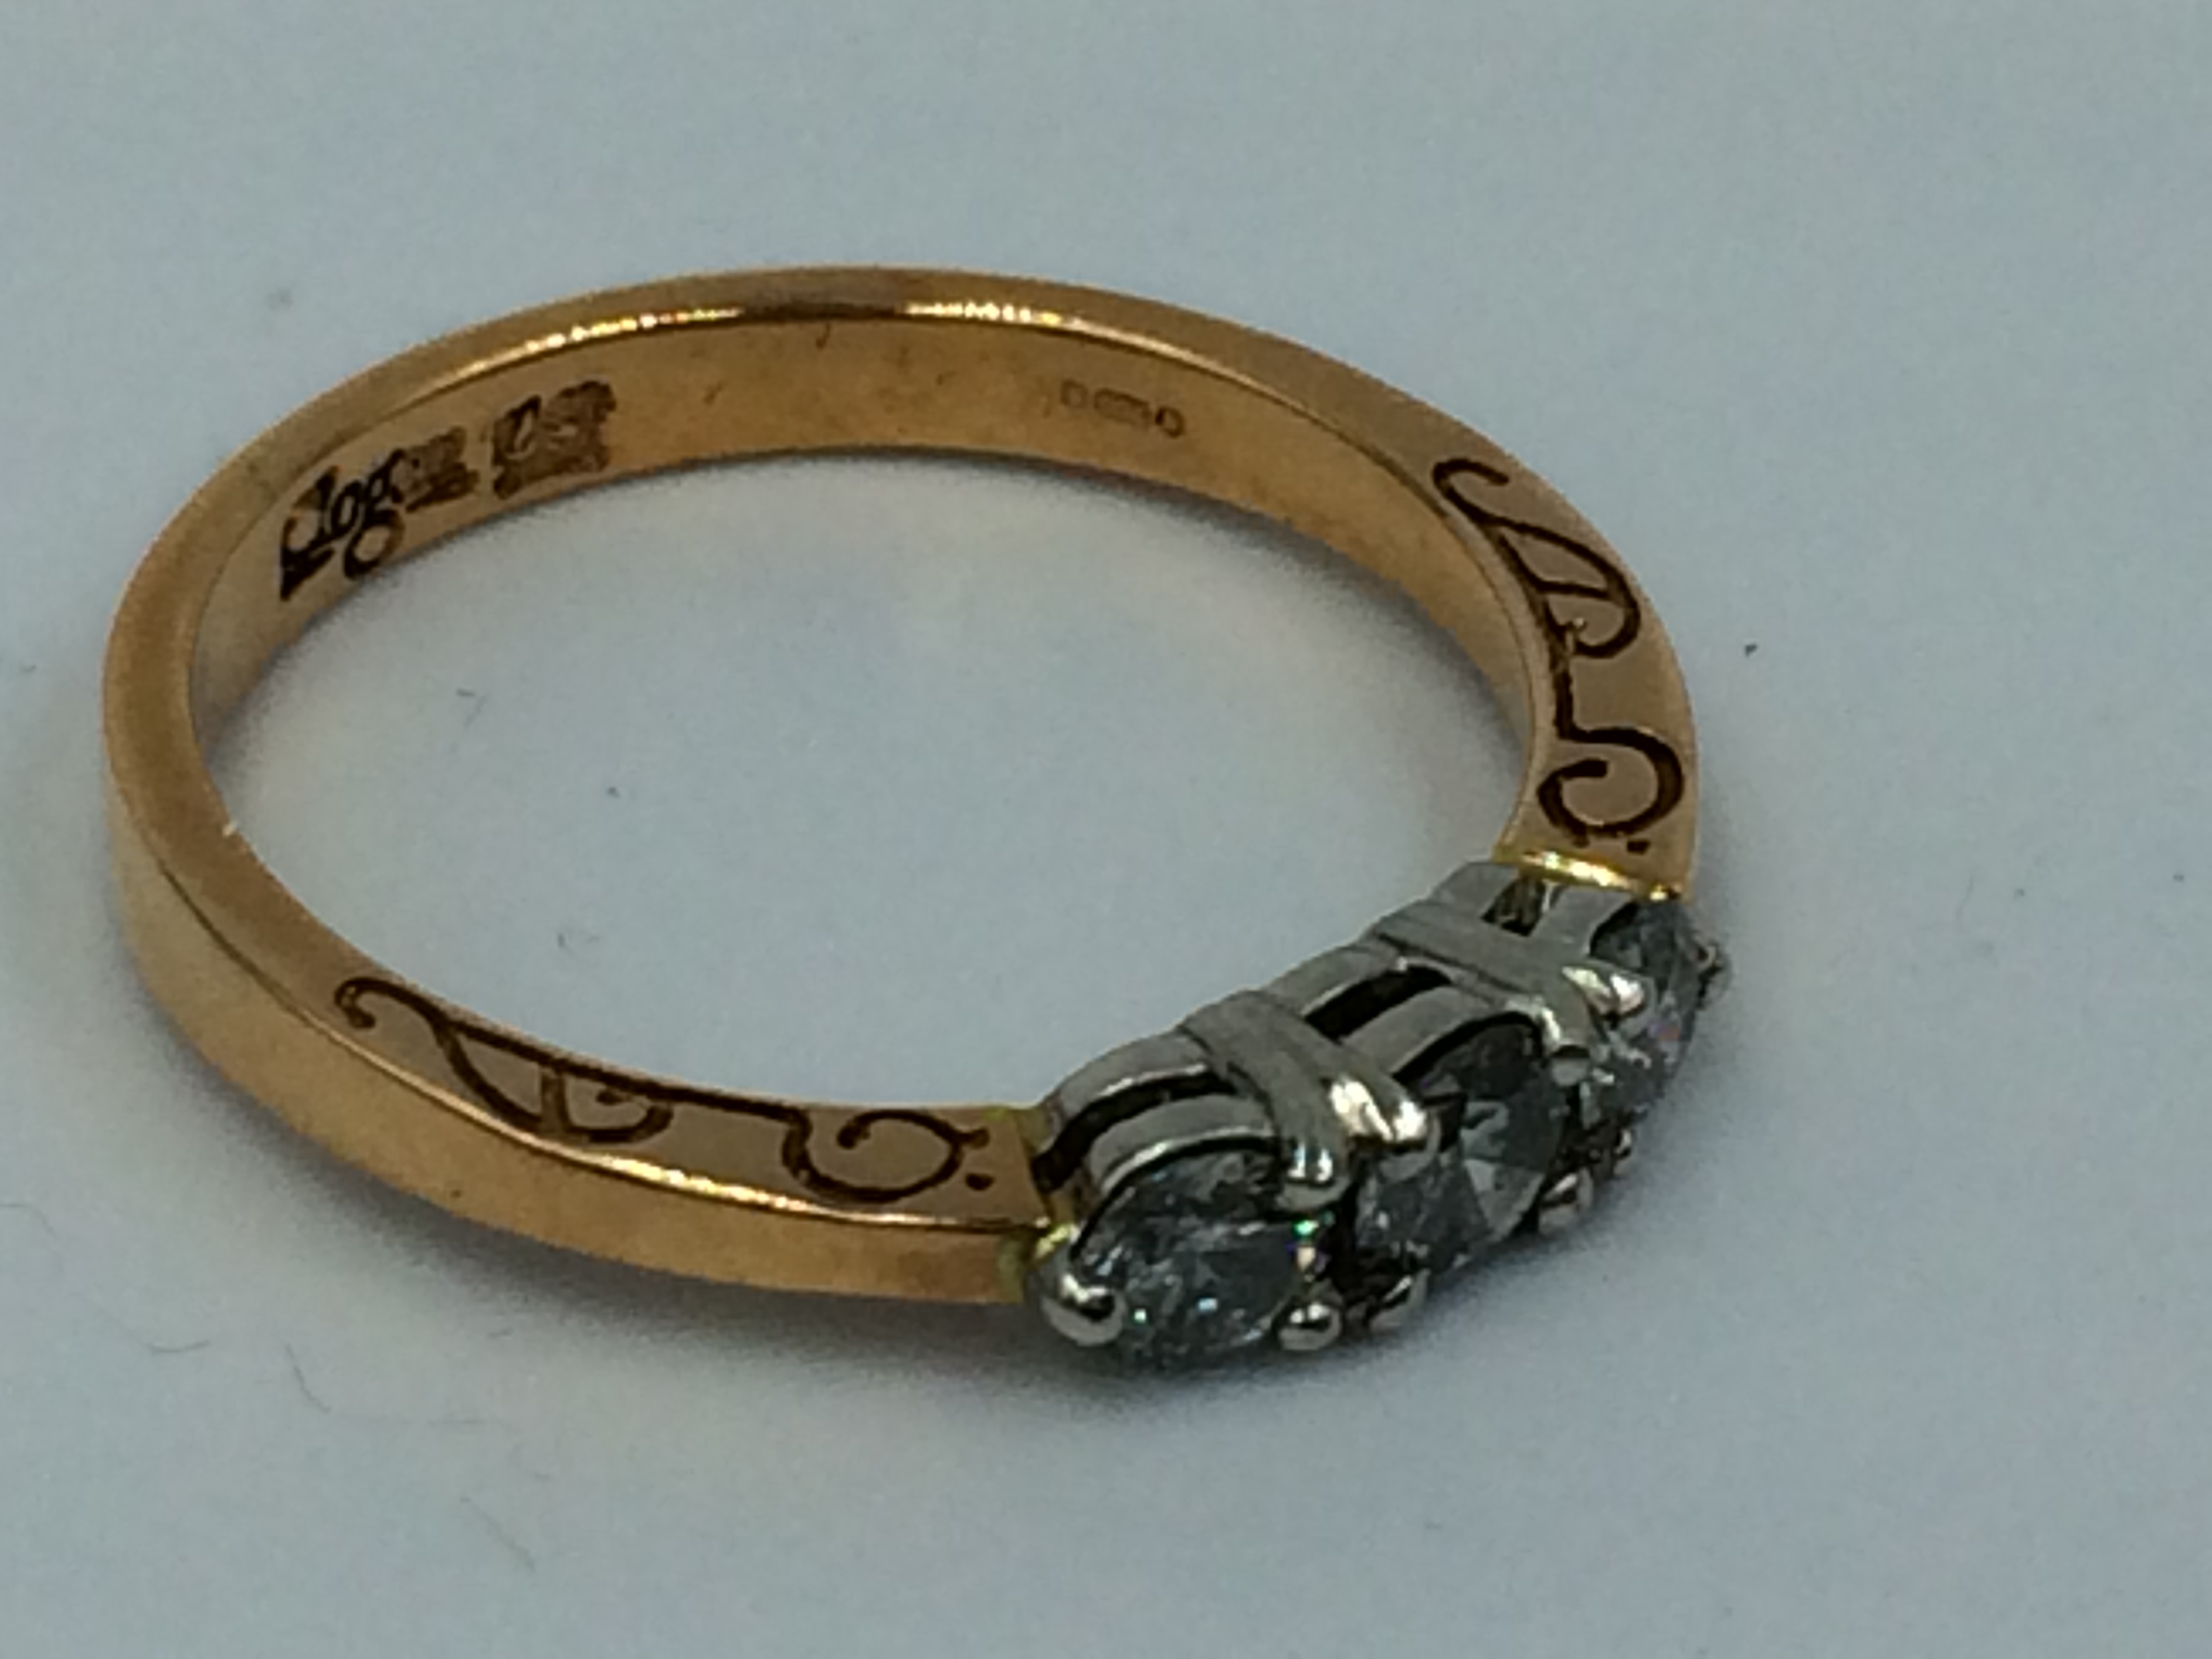 Clogau ring in 18ct gold - Image 2 of 2